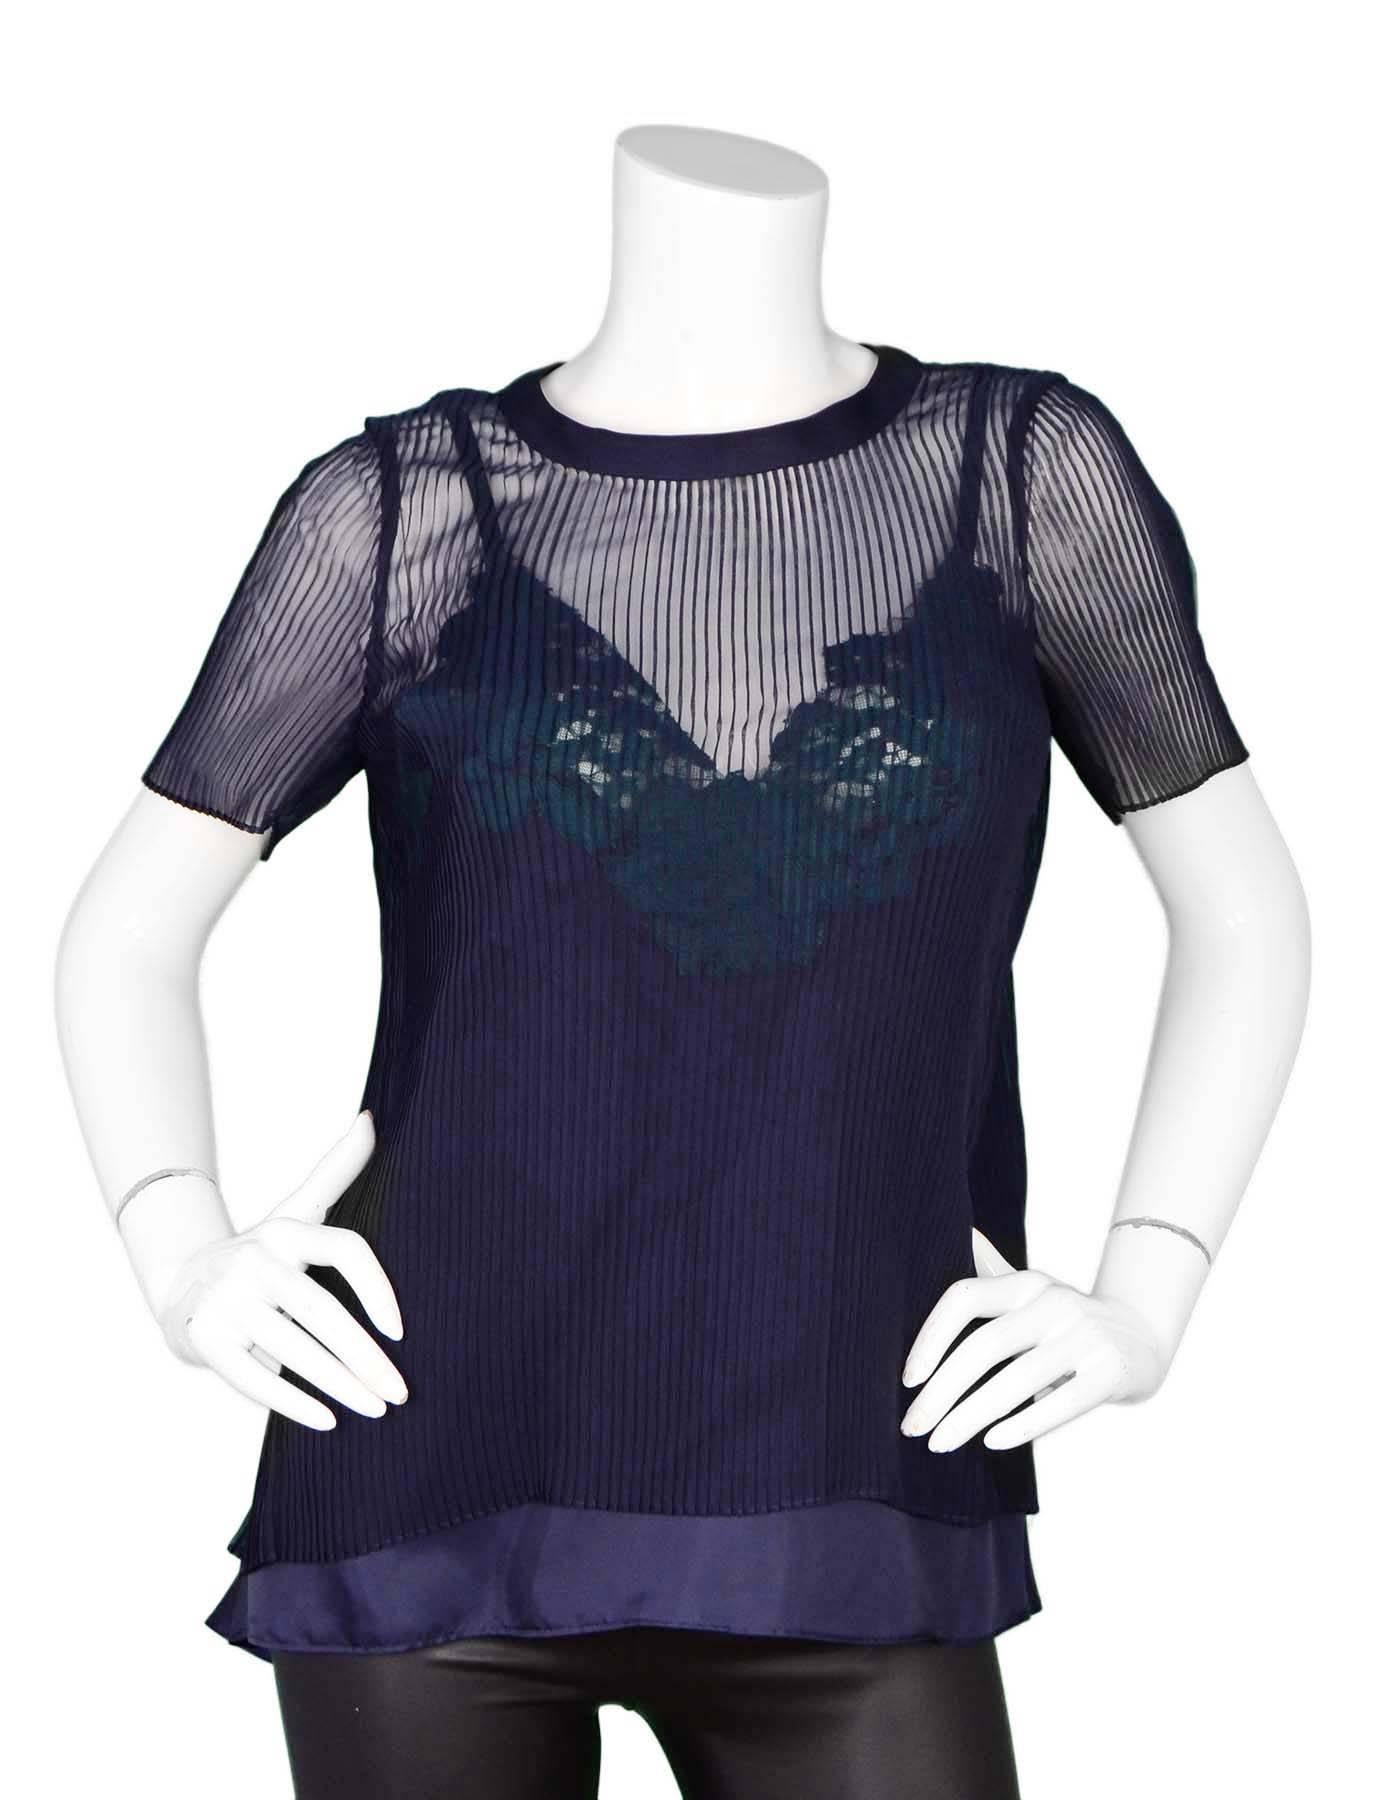 Sacai Navy Pleated Sheer Top Sz S
Features green lace detail underneath pleats and at at back

Made In: Japan
Color: Navy
Composition: 100% Polyester
Lining: None
Closure/Opening: Pull over with single button closure at back of neck
Overall